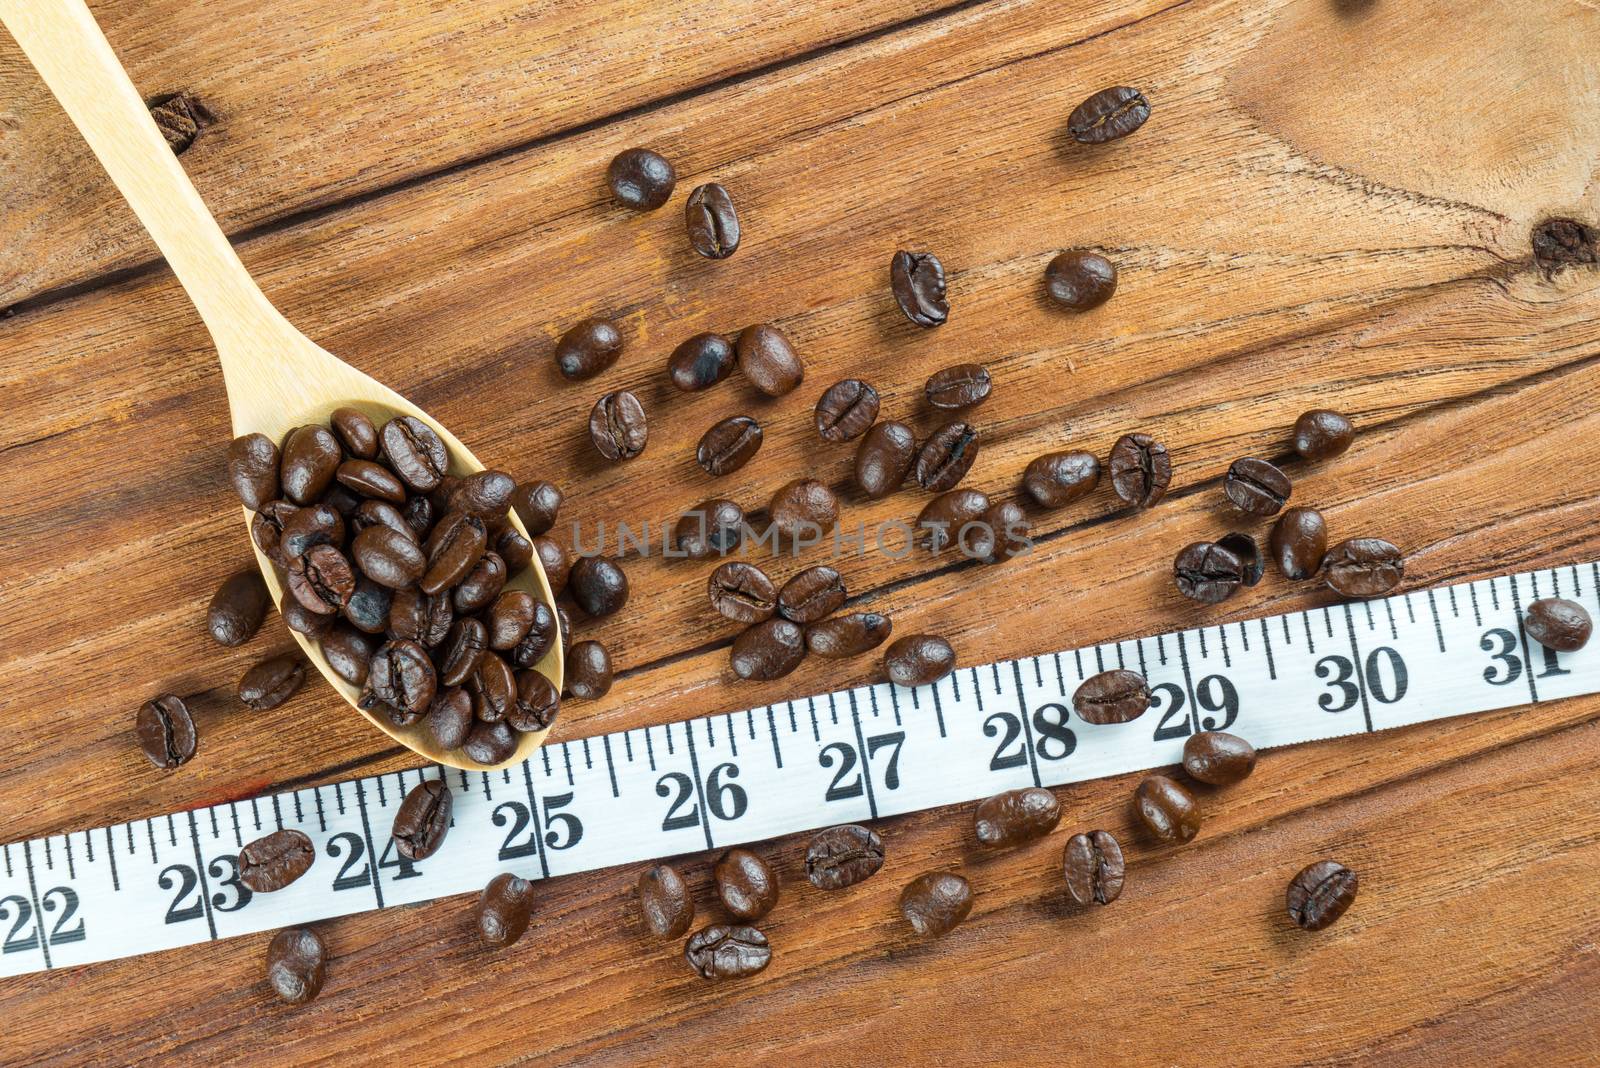 Coffee bean on wooden spoon and tape measure on wooden table background